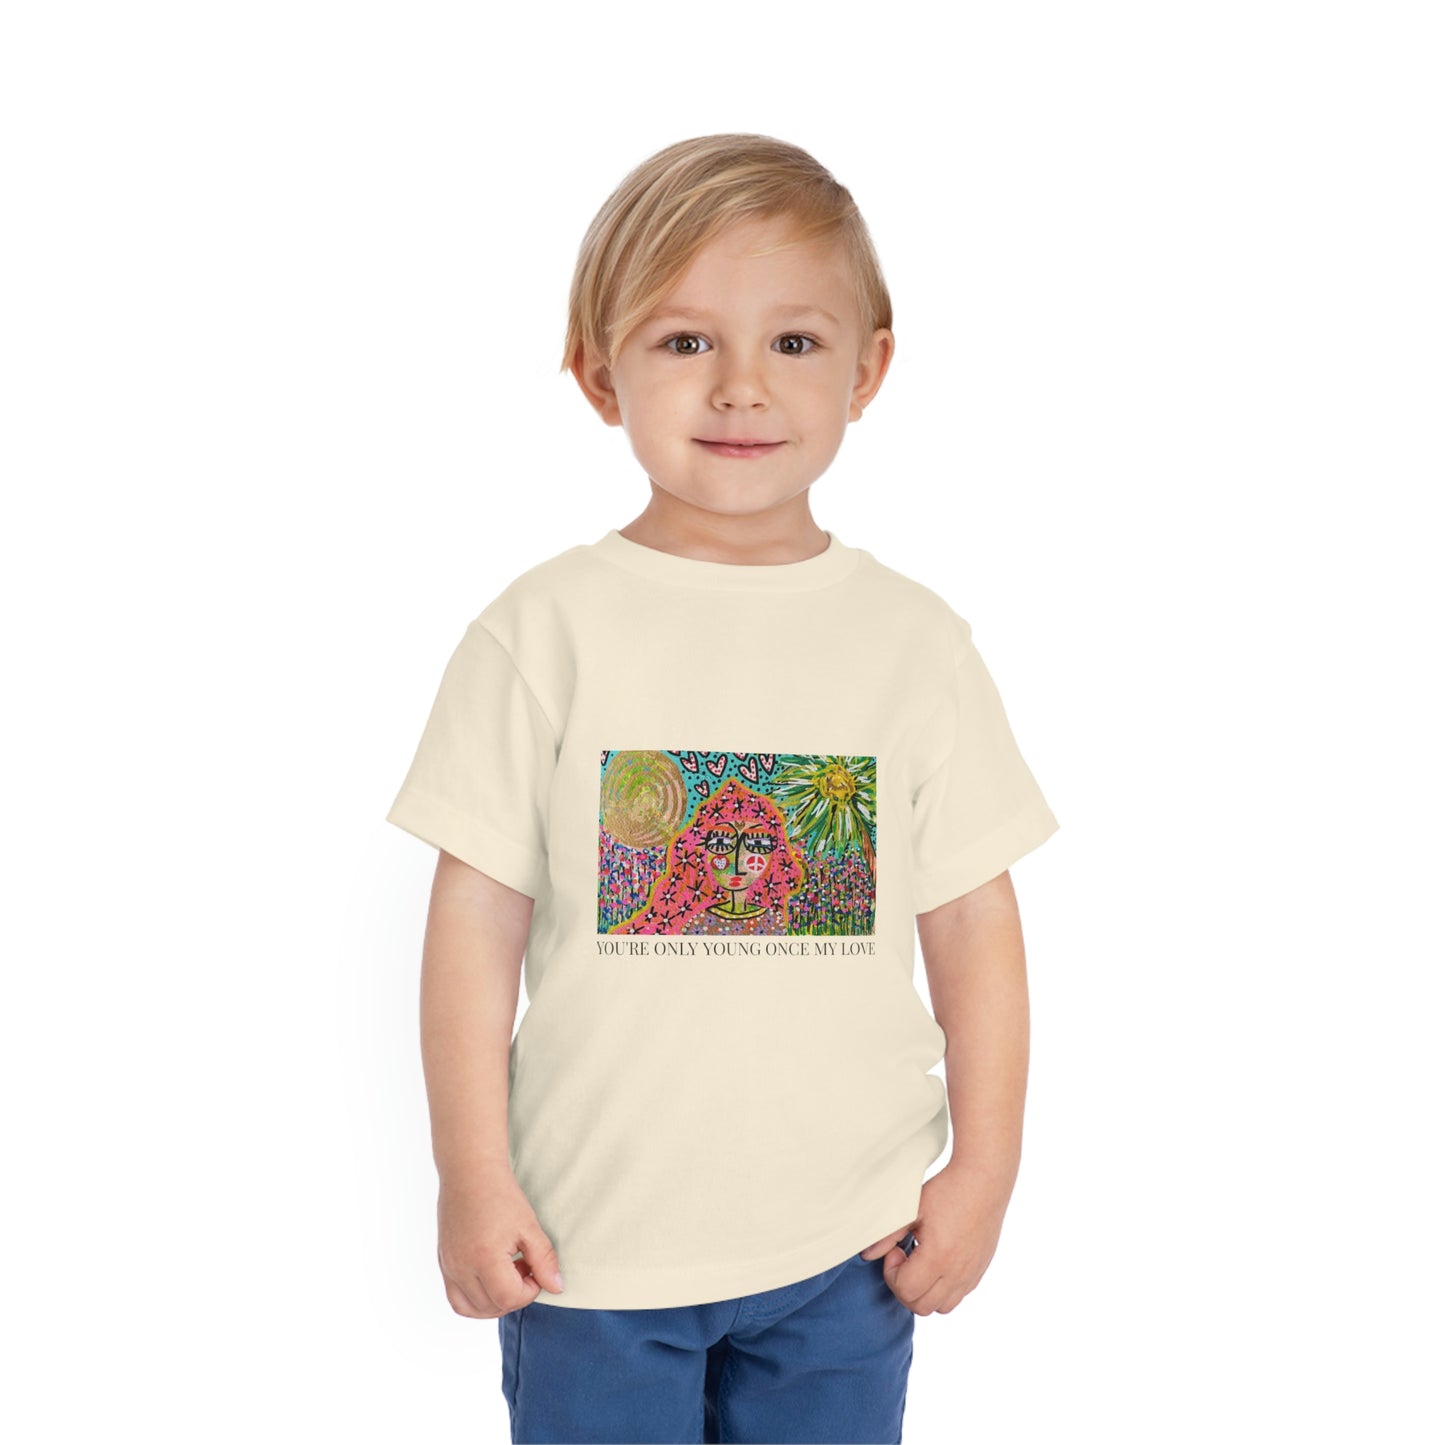 "YOU'RE ONLY YOUNG ONCE MY LOVE"  Girl Talk Art Toddler Short Sleeve Tee